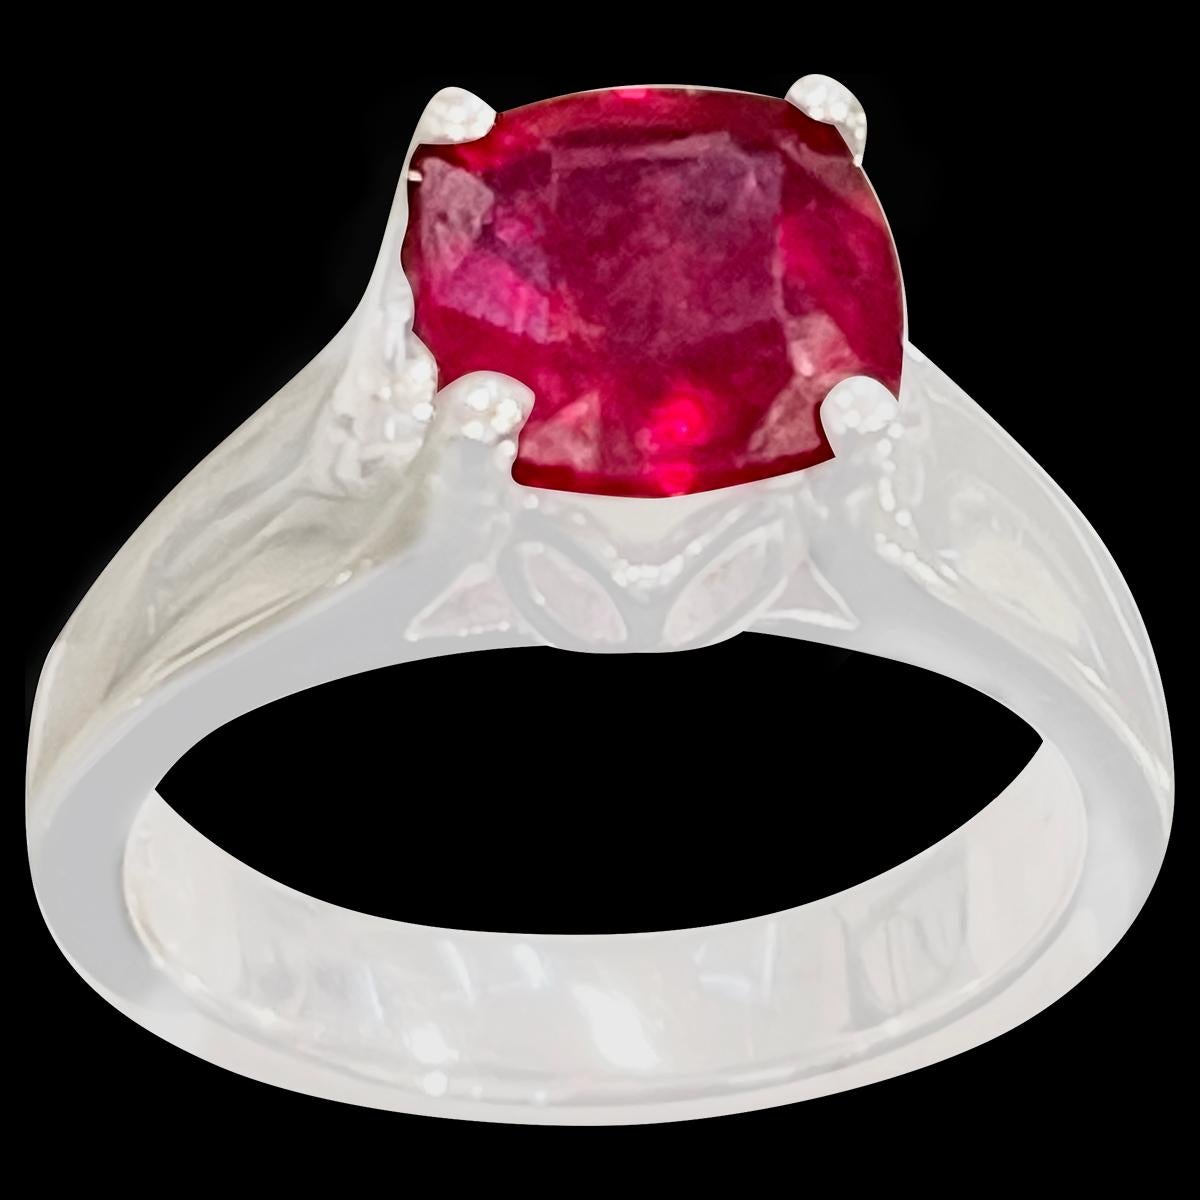 3.5Carat Cushion Treated Ruby 14 Karat White Gold Ring Size 6.5

Its a treated ruby prong set
14 Karat White 6.55.75  ( can be altered for no charge )
Extremally beautiful and solidly make ring. 
This ring is on clearance and is priced very